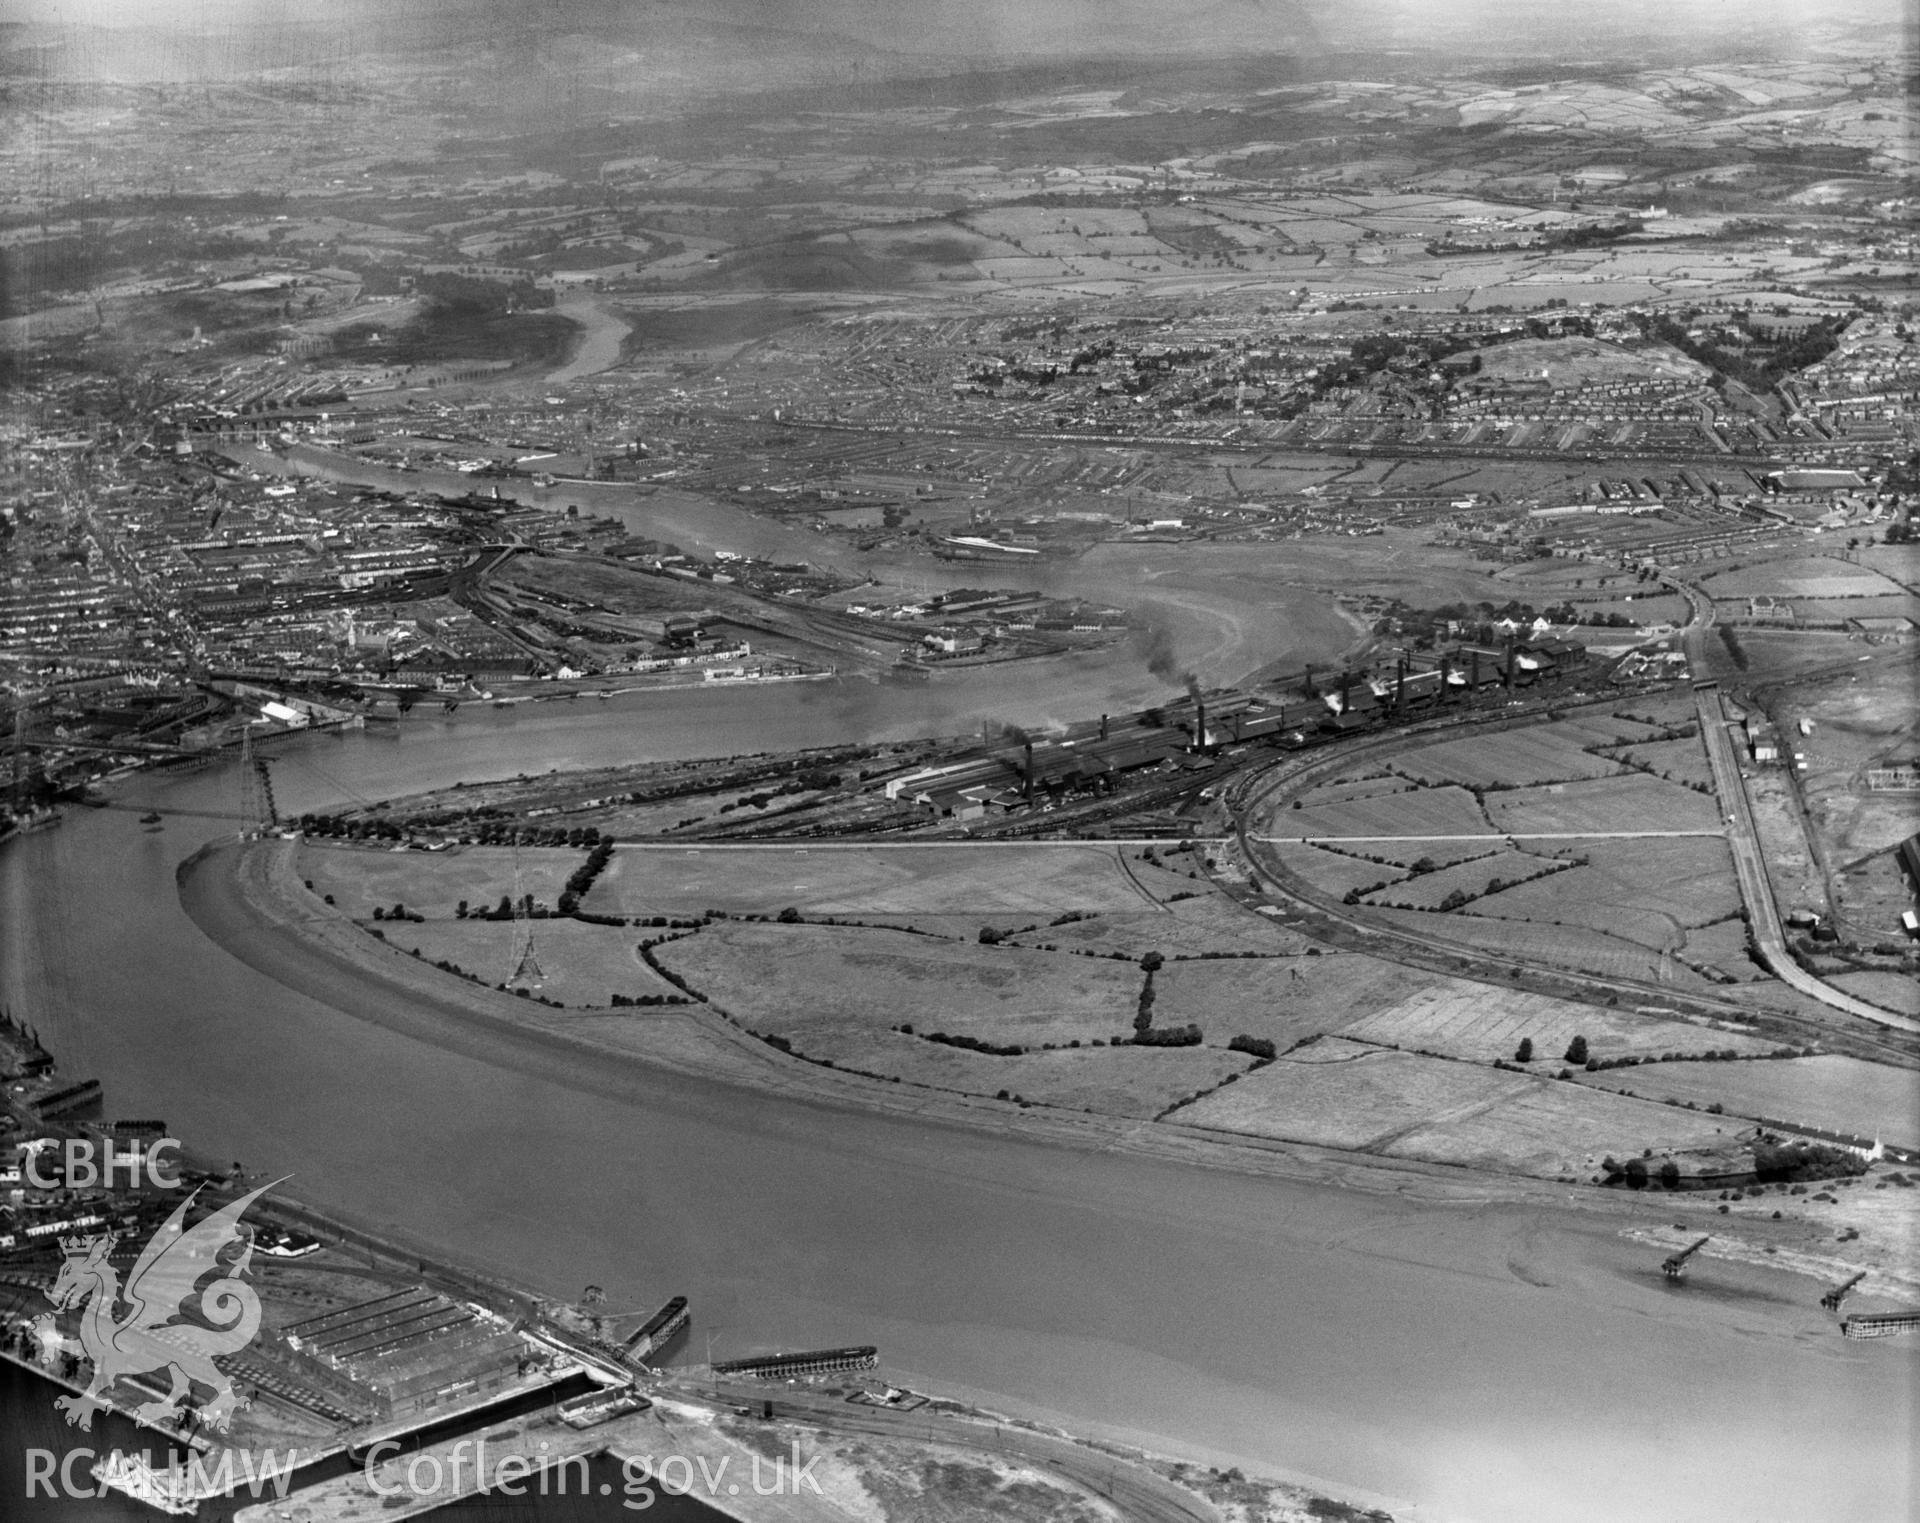 View of Newport showing Newport Tubeworks, oblique aerial view. 5?x4? black and white glass plate negative.